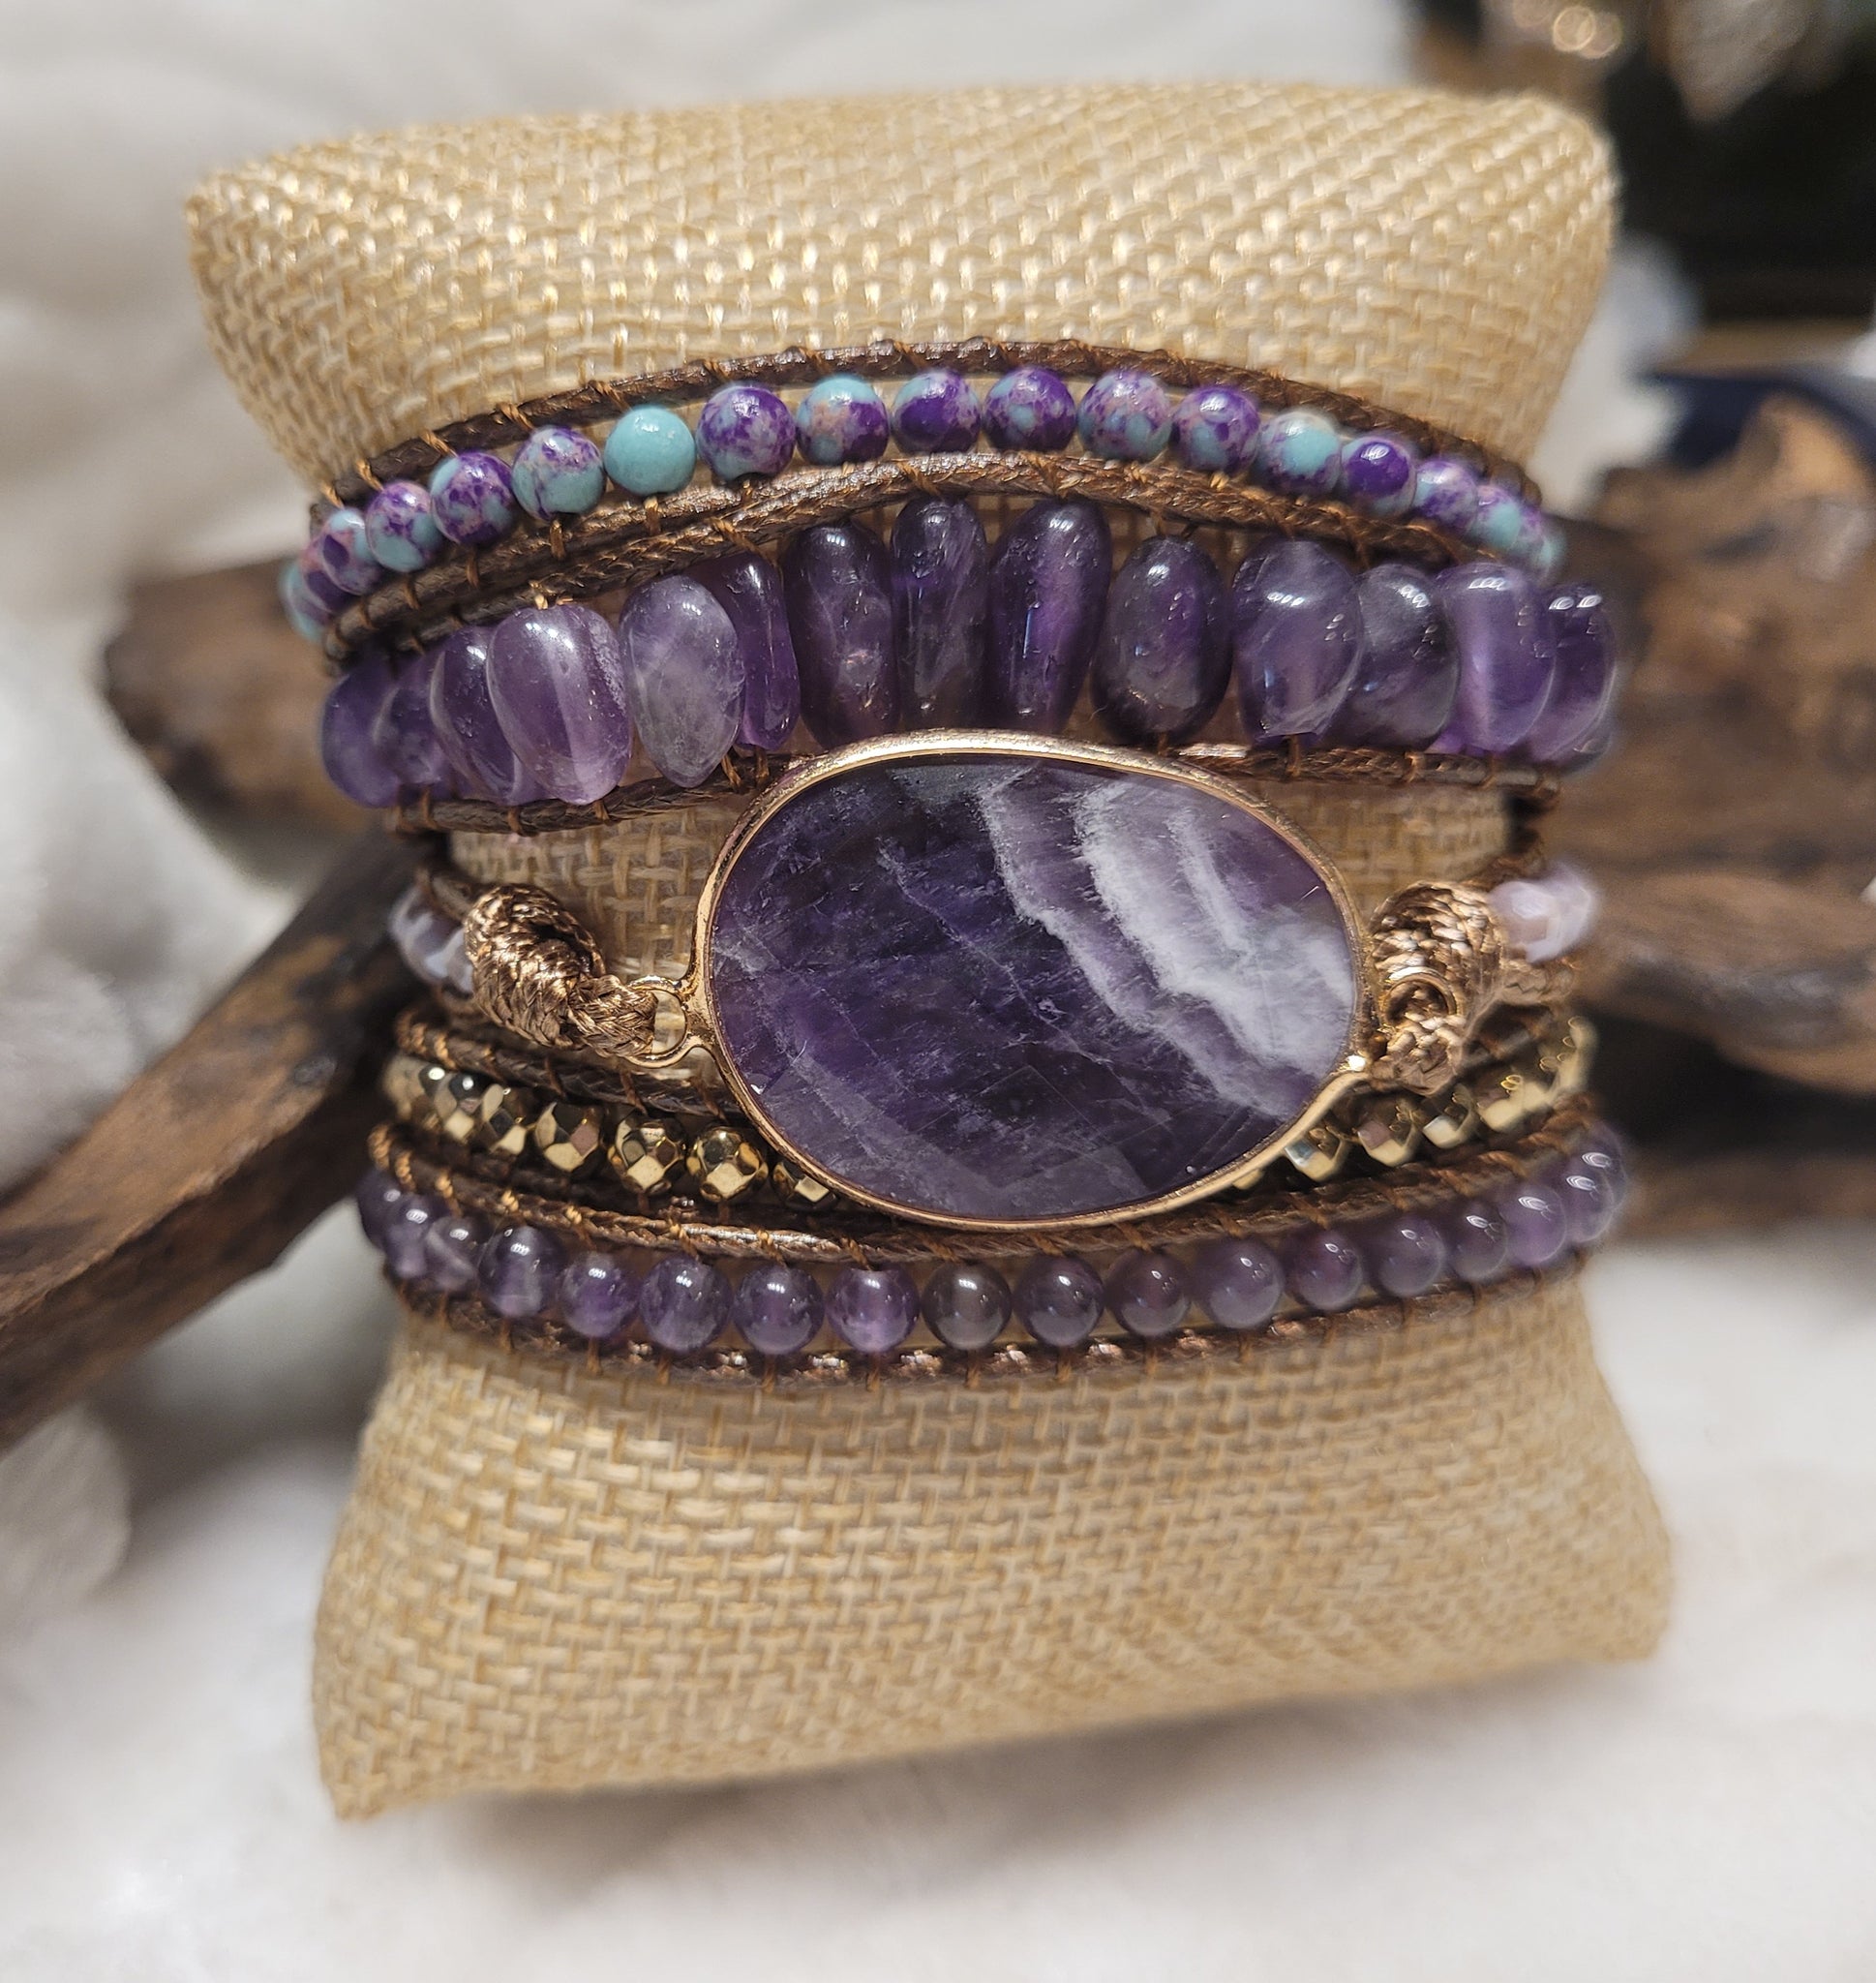 Amethyst Natural Stone and leather cord Wrap Bracelet